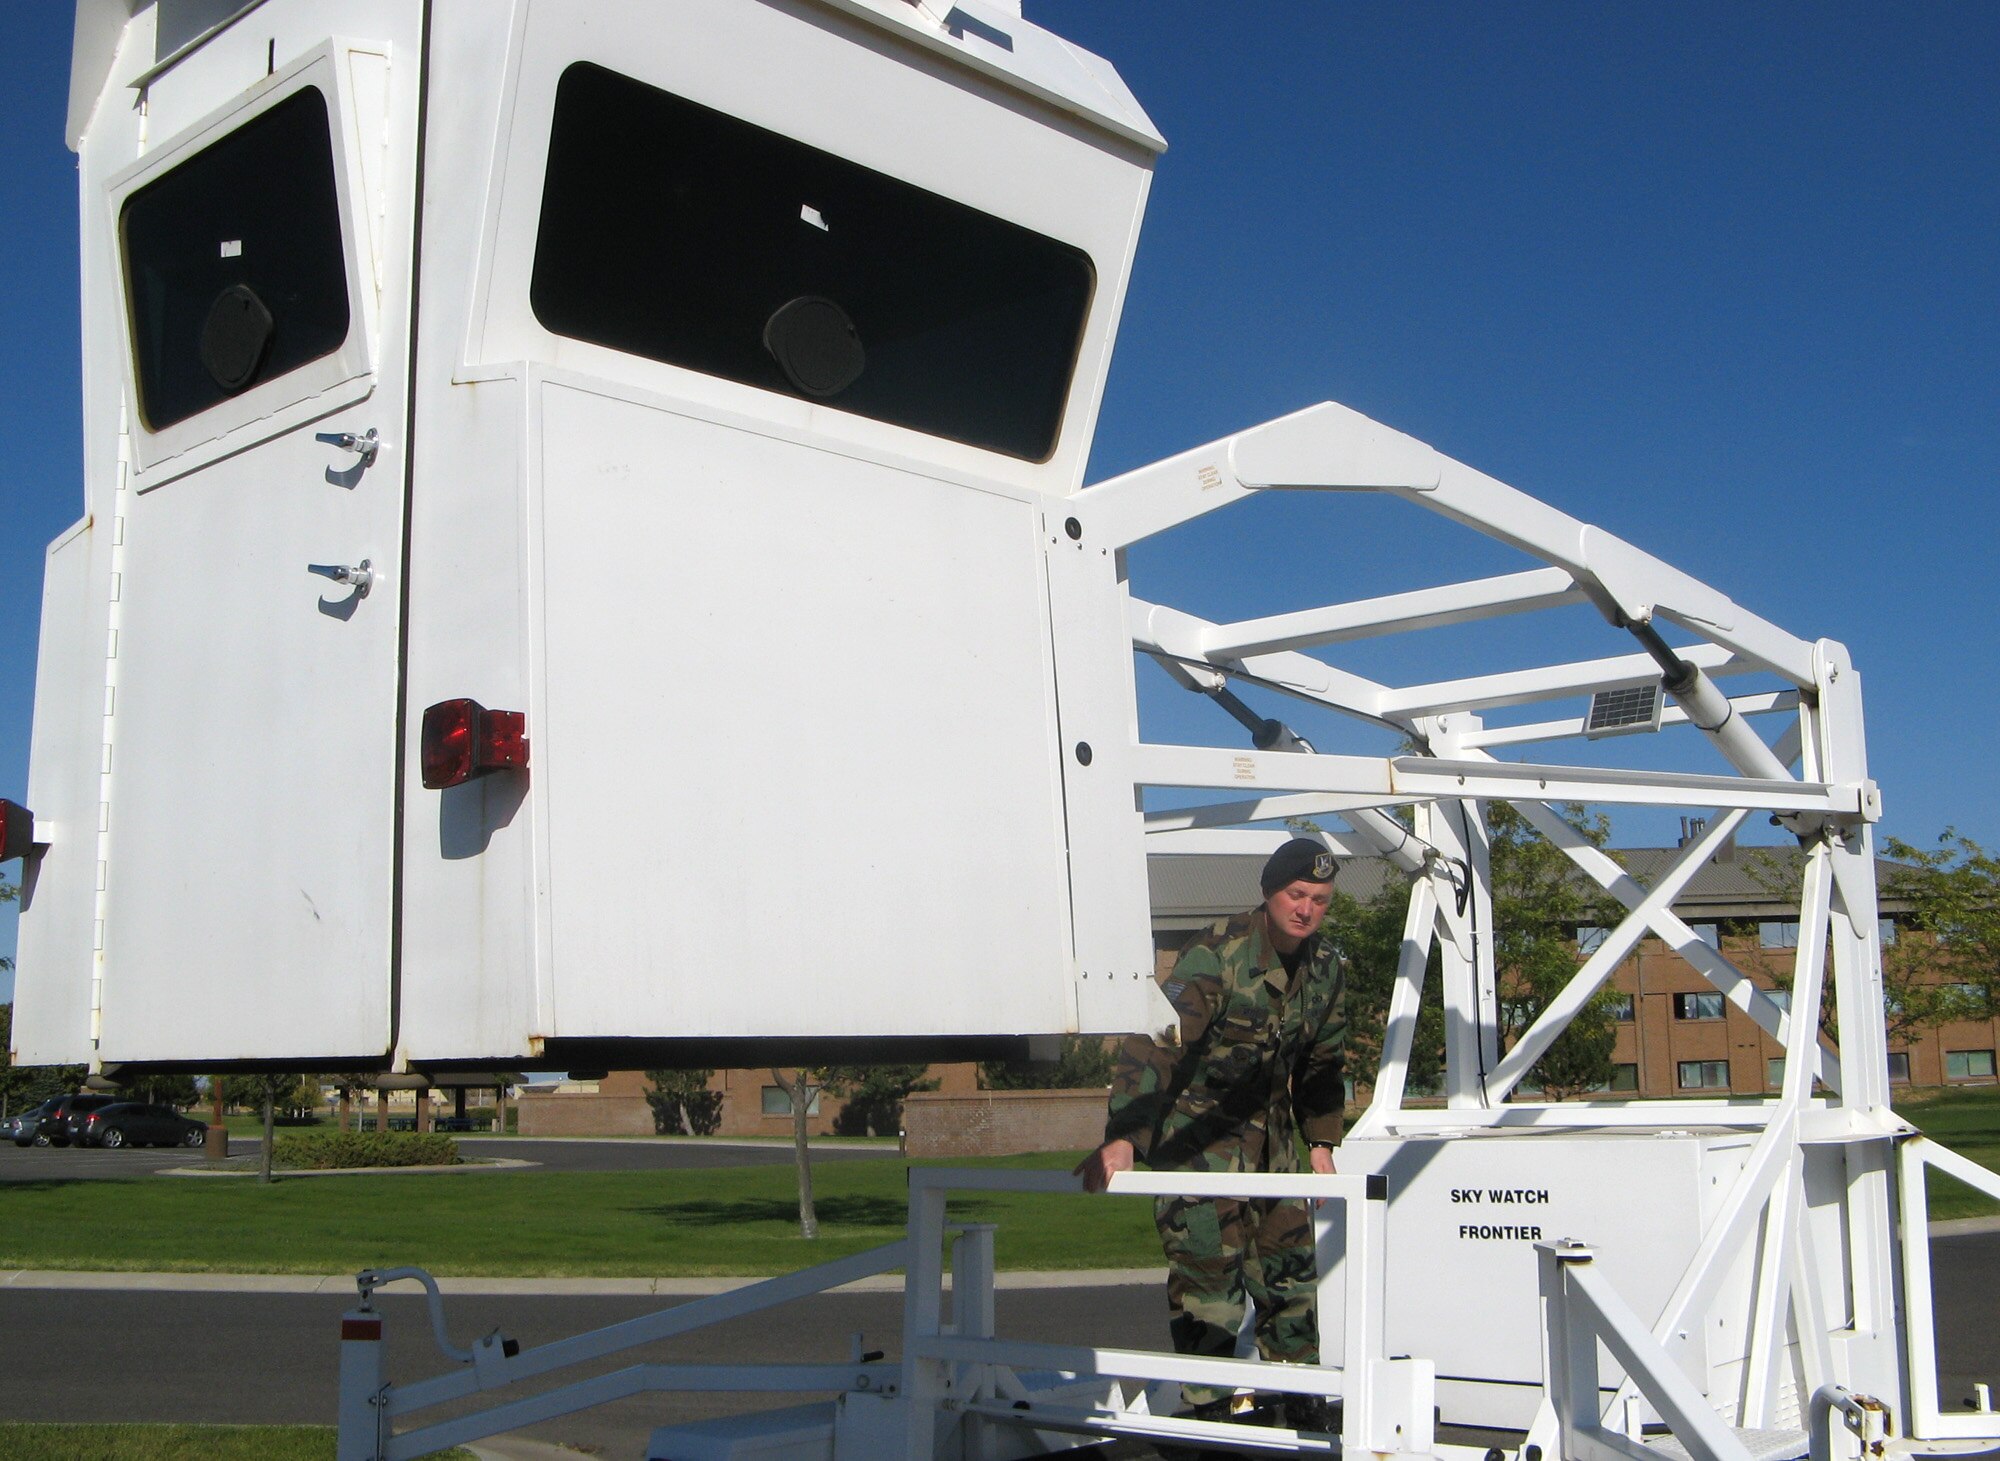 FAIRCHILD AIR FORCE BASE, Wash. – Tech. Sgt. Dan Merrill, Fairchild NCO-in-charge of the Installation Security Constable program, adjusts the solar panel on the “Sky Watch” tower, a mobile surveillance tower. (U.S. Air Force photo/Shadi May)
